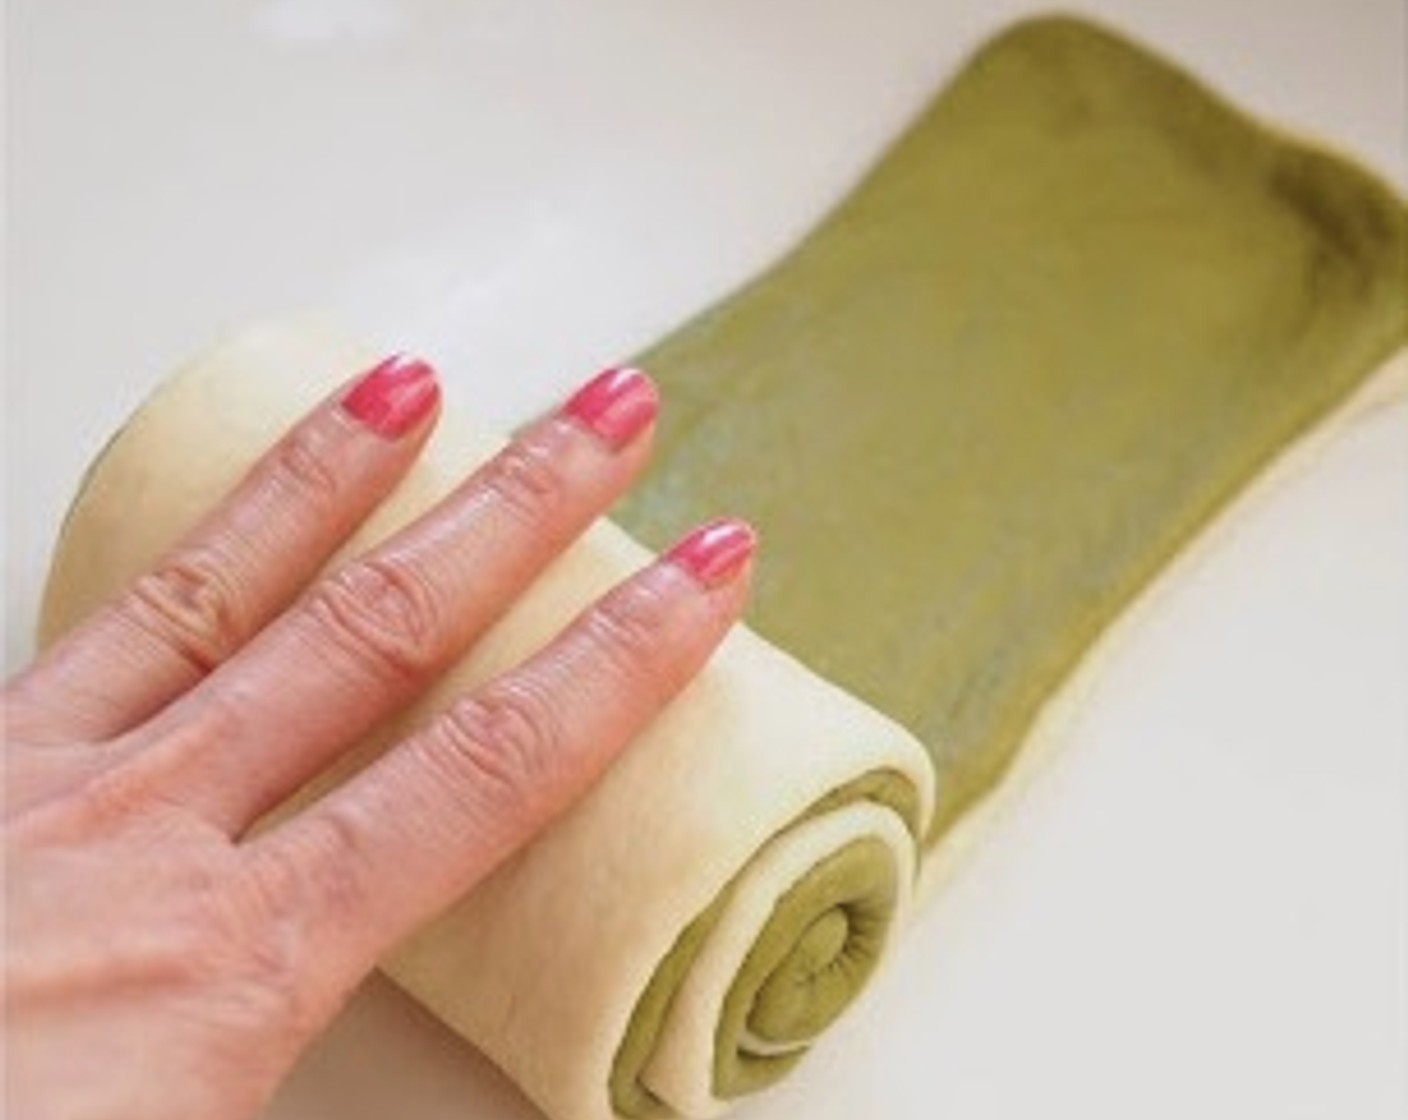 step 8 Spray water on the plain dough and place the matcha dough over the plain dough. Press with your palm to make sure both layers stick together. Spray some water on the matcha dough and roll it up tightly, starting from the shorter side until a log is formed. Pinch to seal the seams.